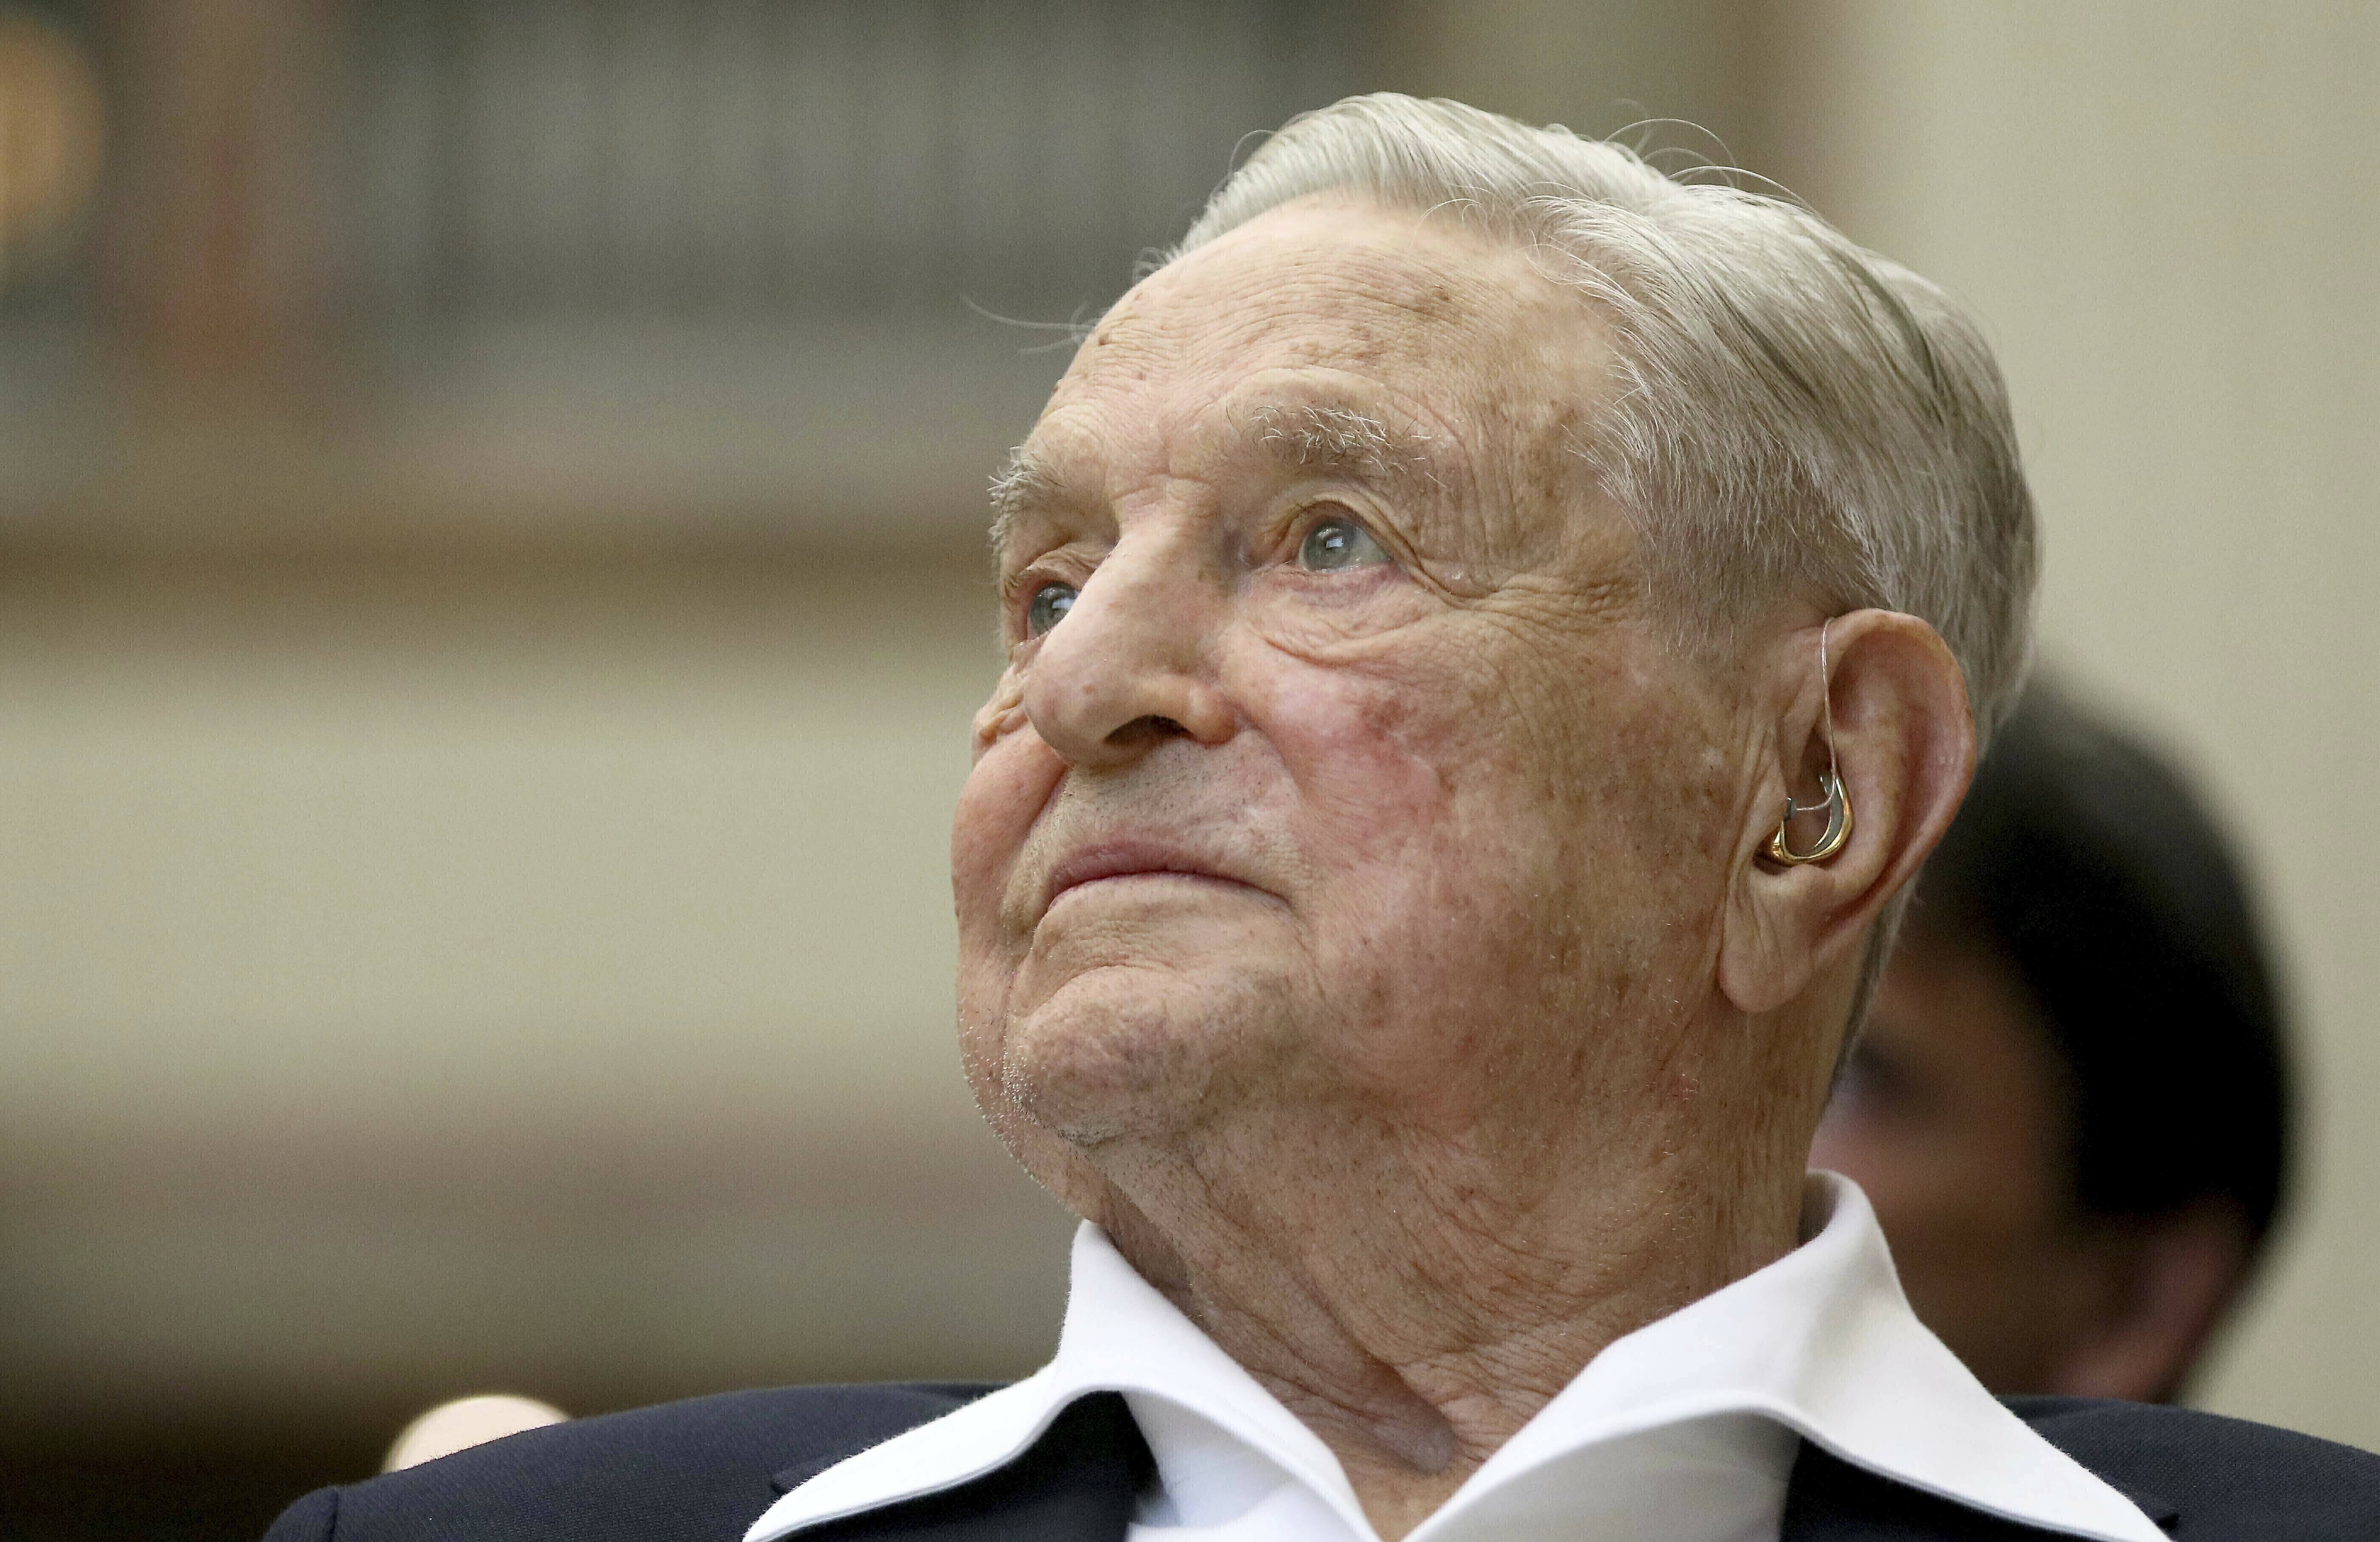 George Soros, fake philanthropist and destroyer of cities, passes flame thrower to son 